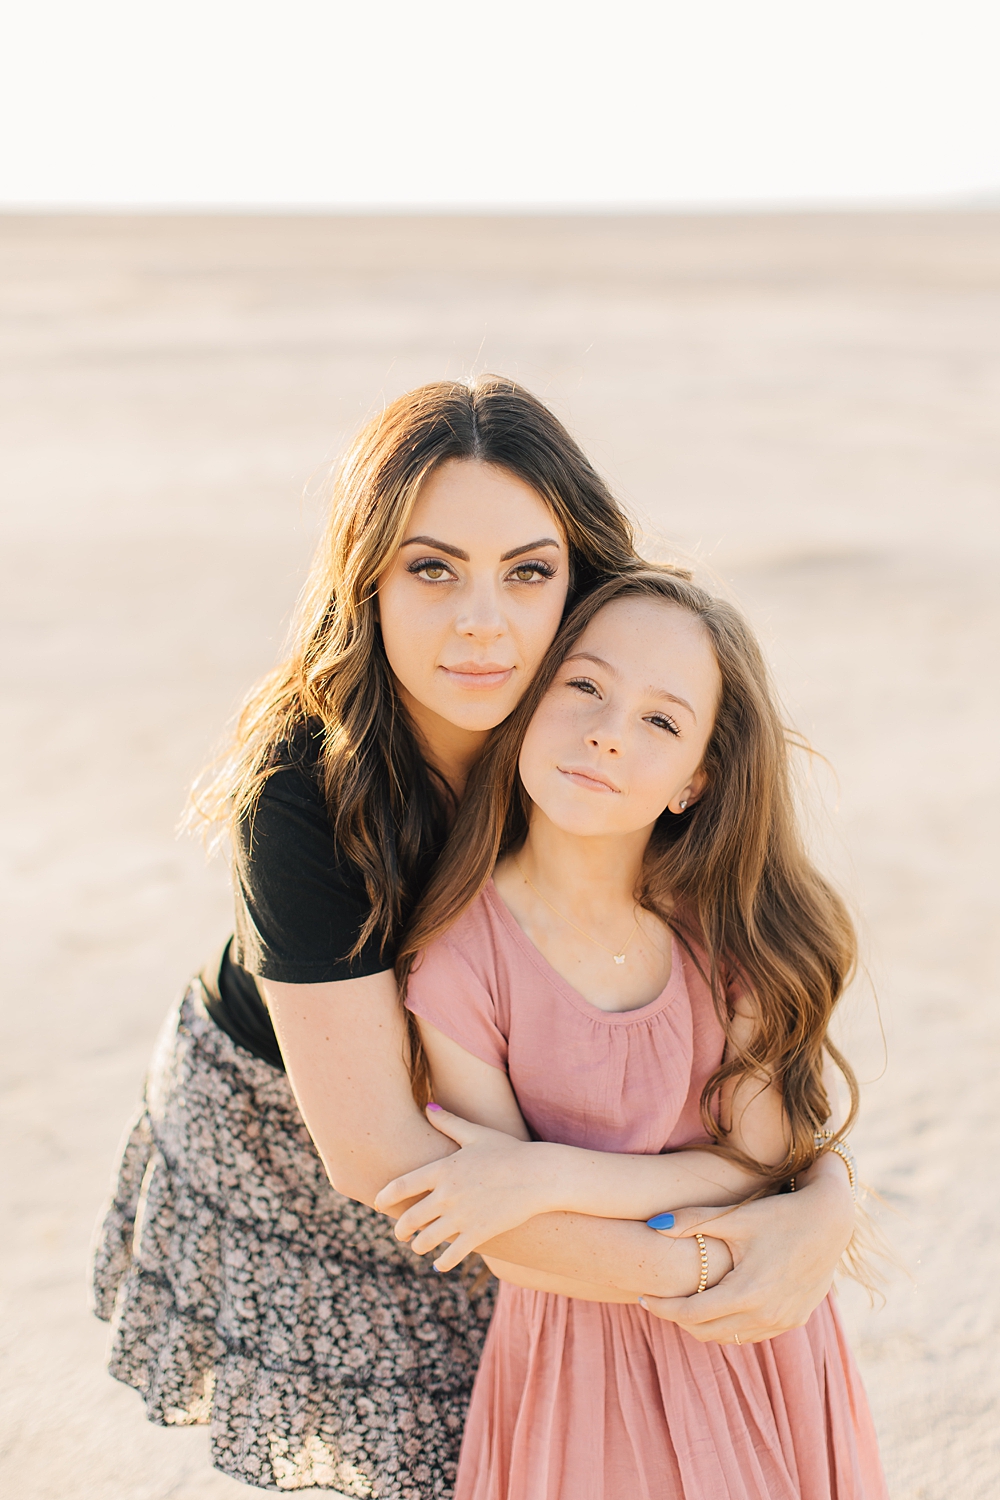 Mother Daughter Photography l Beautiful Poses for Mother and Daughter ll  Cute Photo Posing Ideas - YouTube